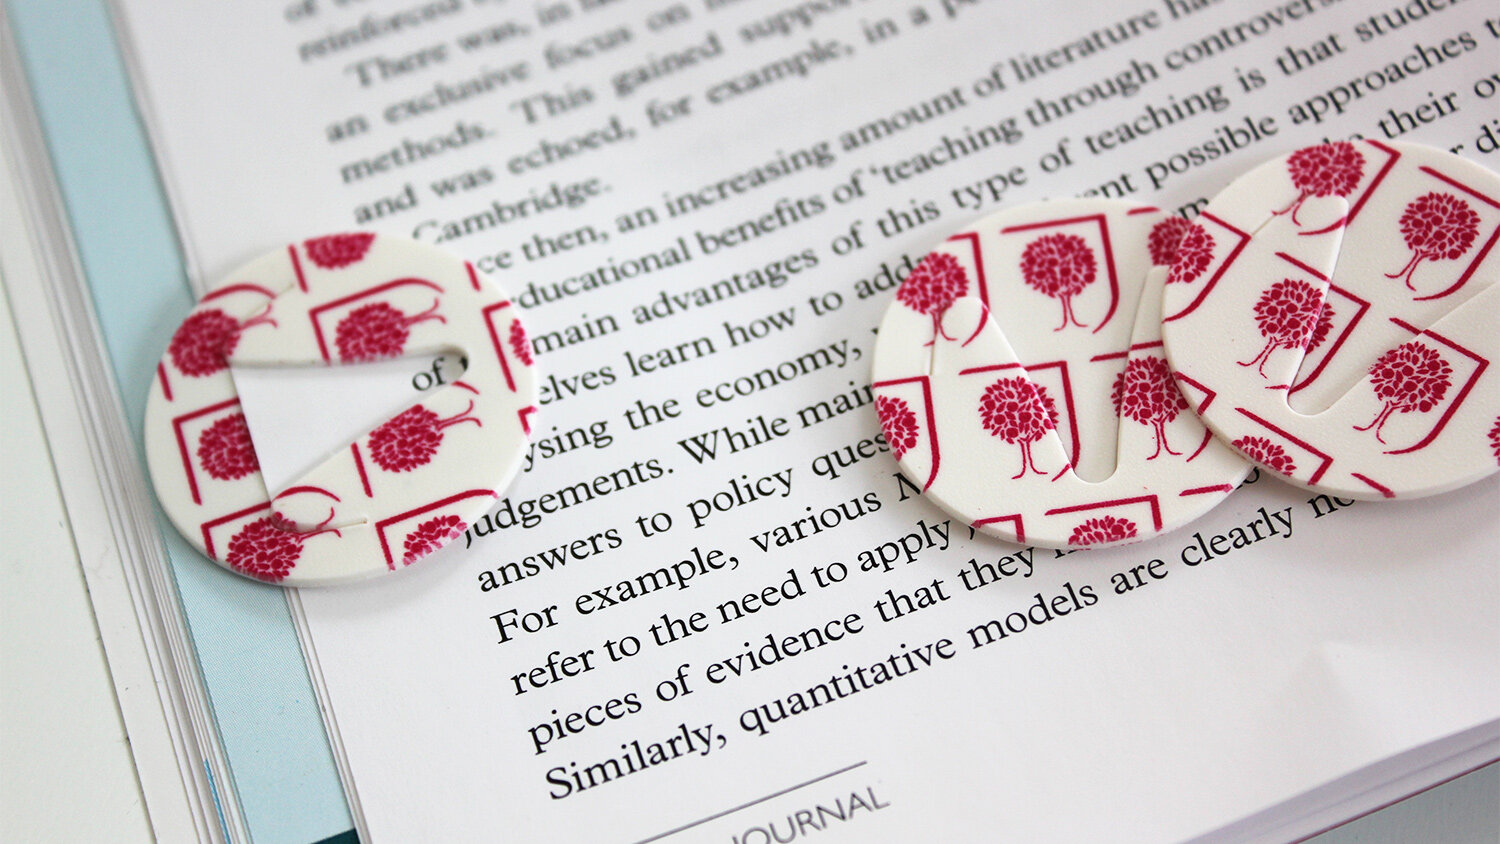 Blue-Marmalade-Bi-clip-branded-RHS-Royal-Horticultural-Society-Made-to-order-bookmark-paperclip-recycled-plastic.jpg